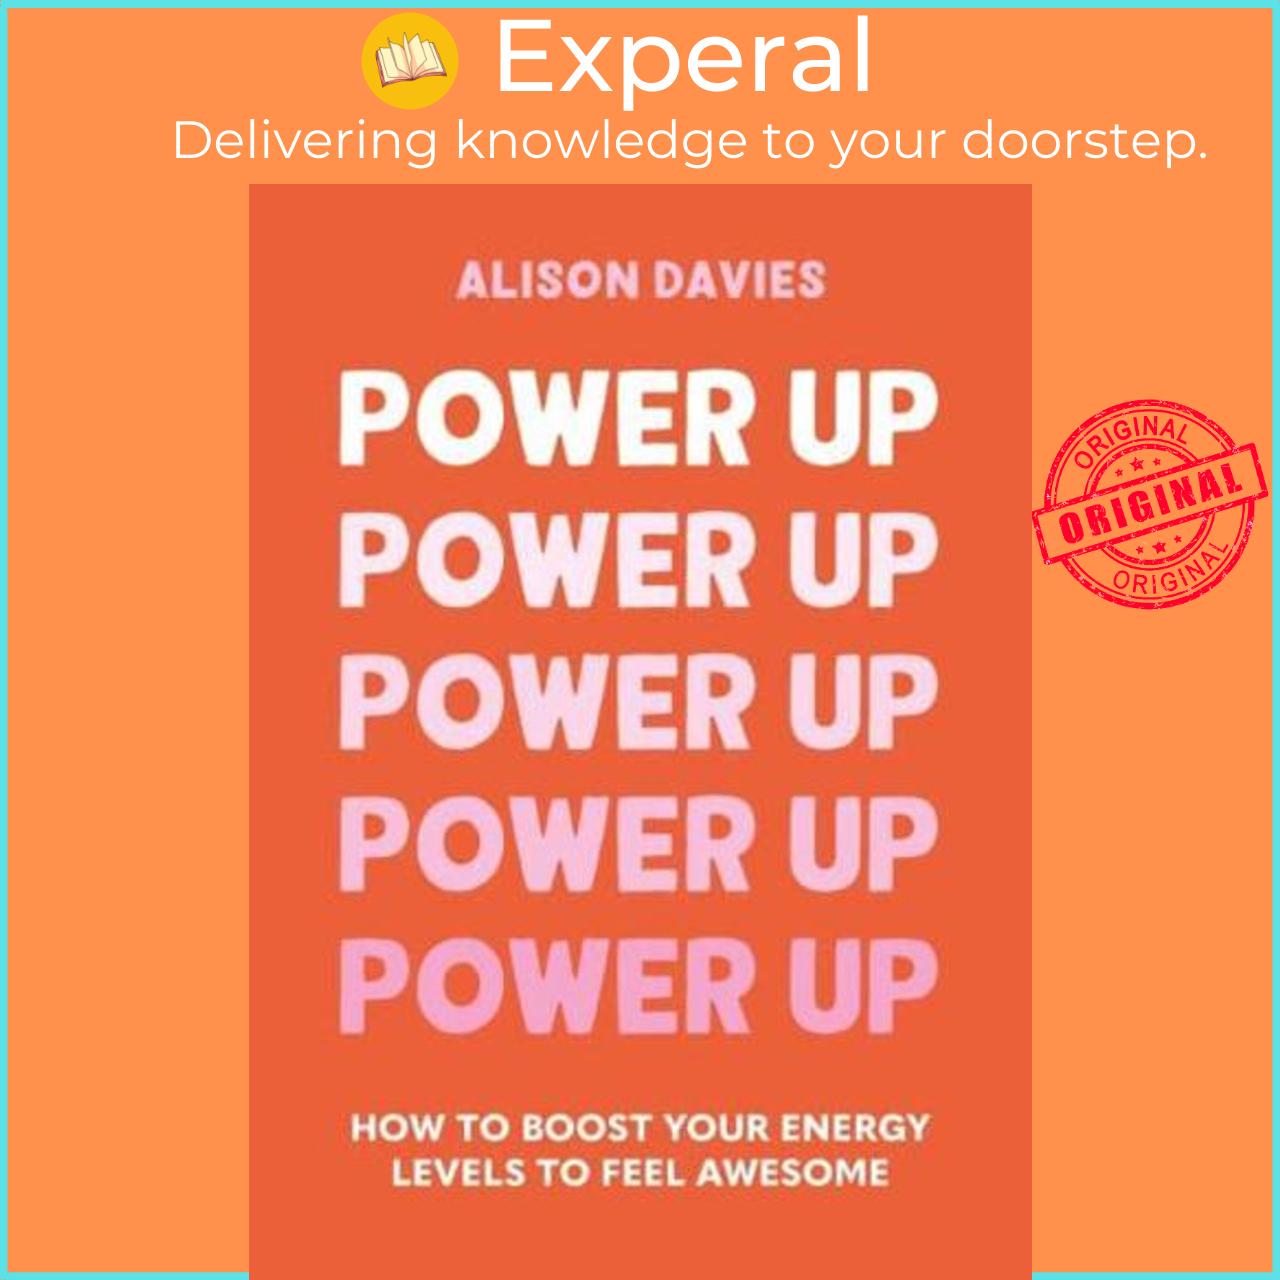 Sách - Power Up How to Feel Awesome by Protecting and Boosting Positive Energy by Alison Davies (UK edition, Hardback)